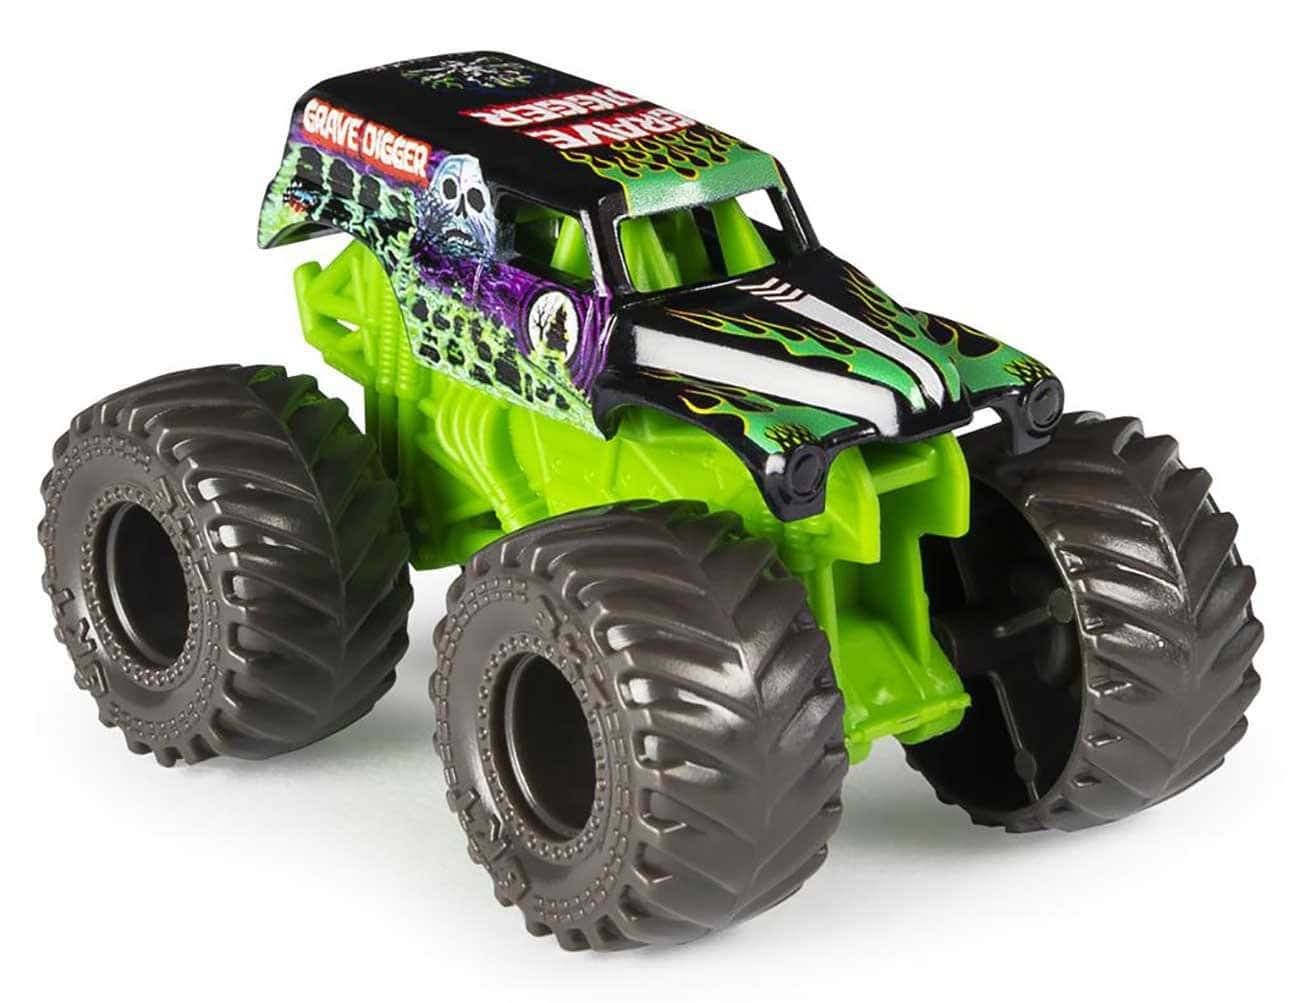 Immaginedel Giocattolo Grave Digger Monster Truck